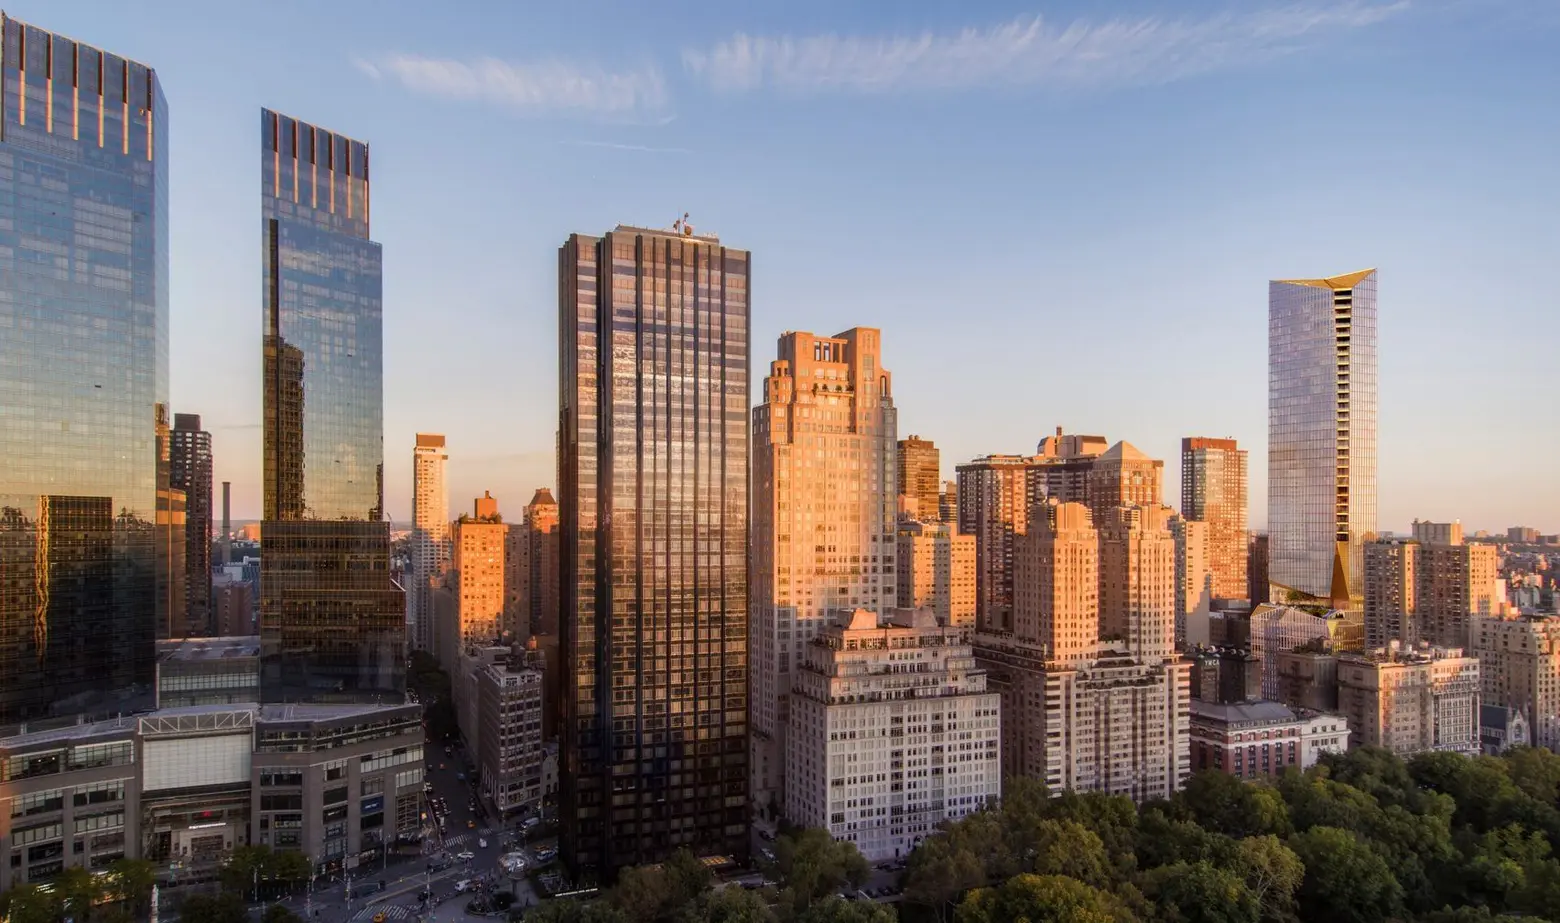 Construction of Upper West Side’s tallest tower can proceed